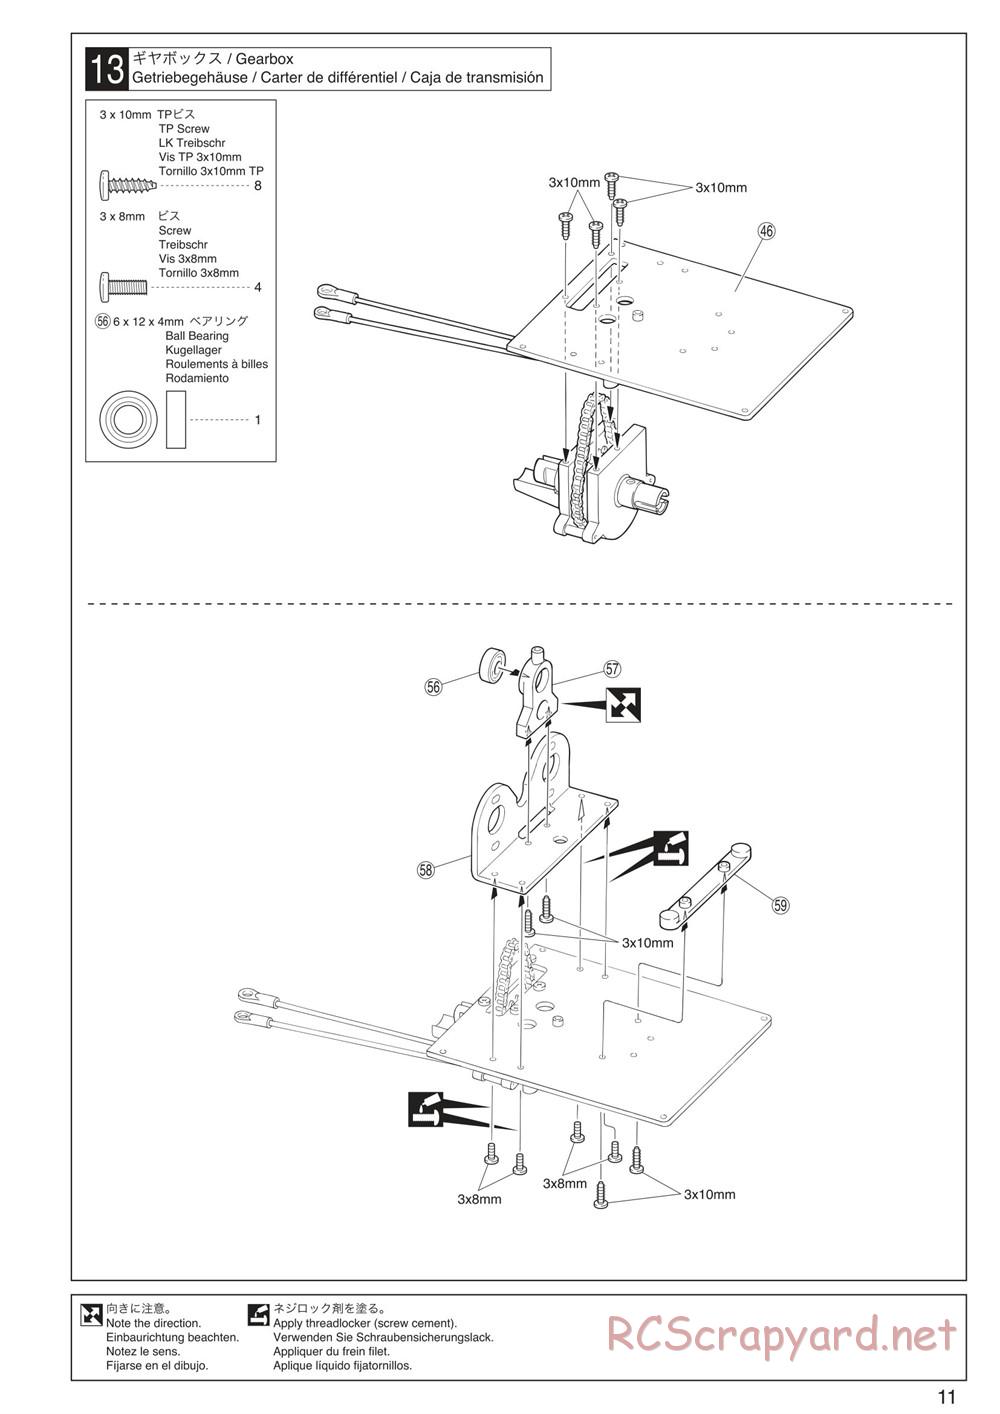 Kyosho - Mad Crusher VE - Manual - Page 11